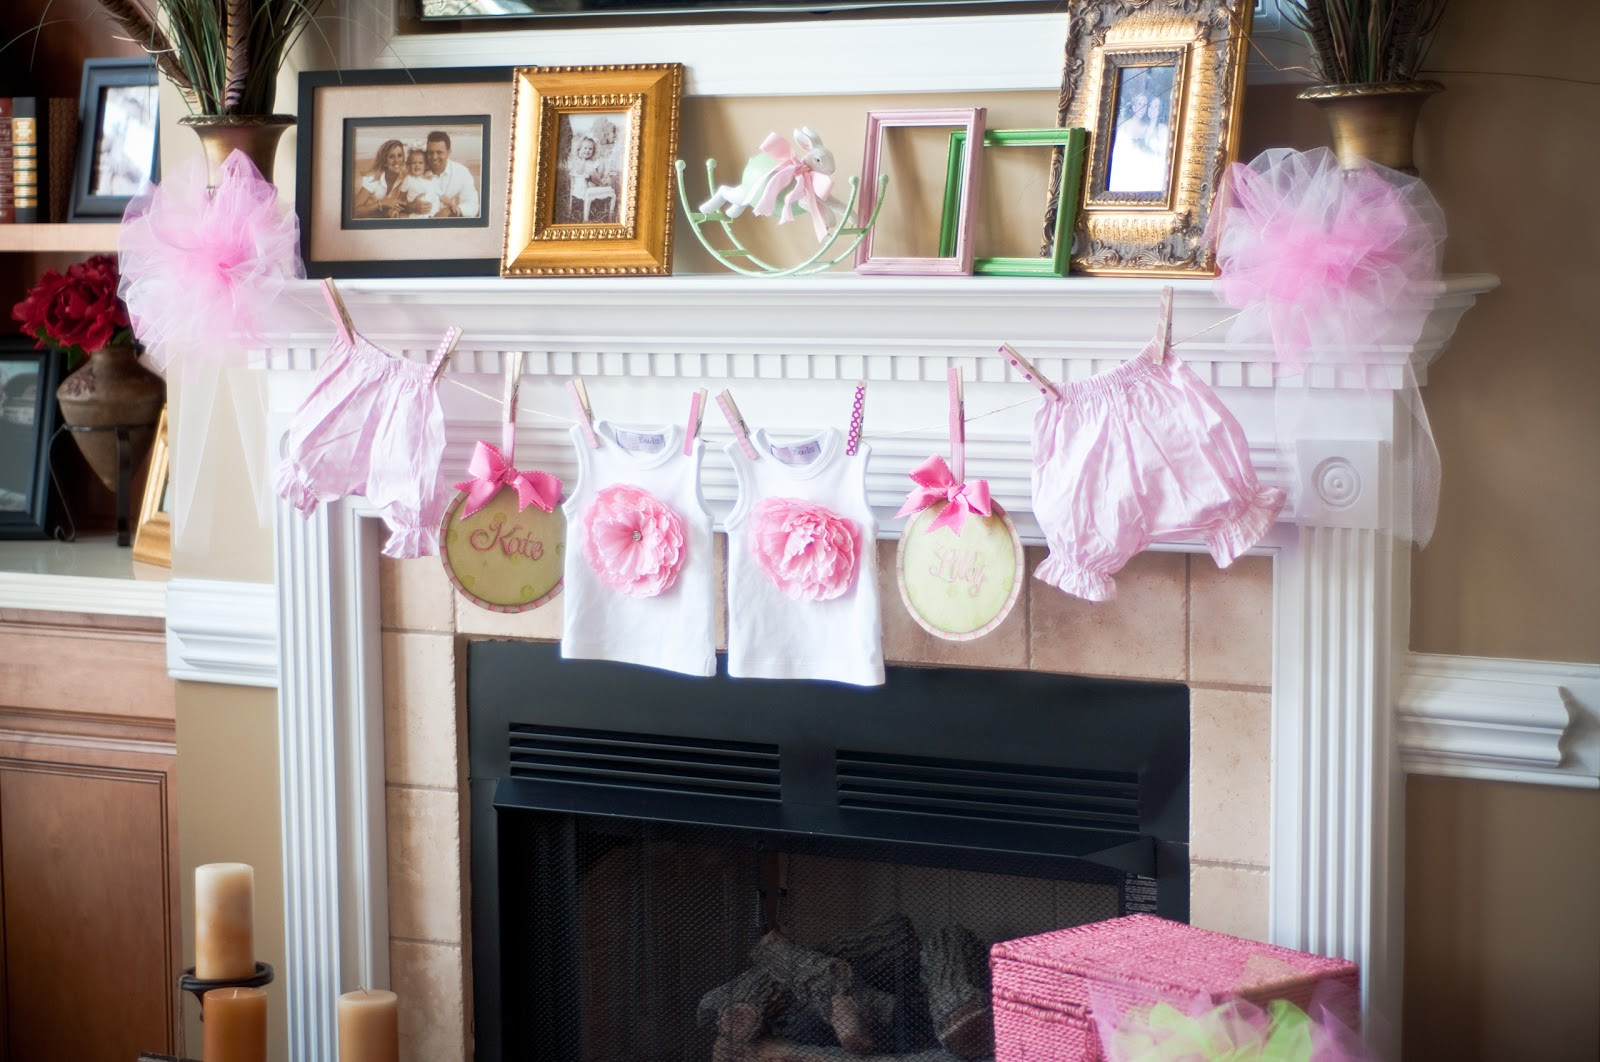 Baby Shower Decorating Ideas For A Girl
 paws & re thread baby shower decorating ideas clothes